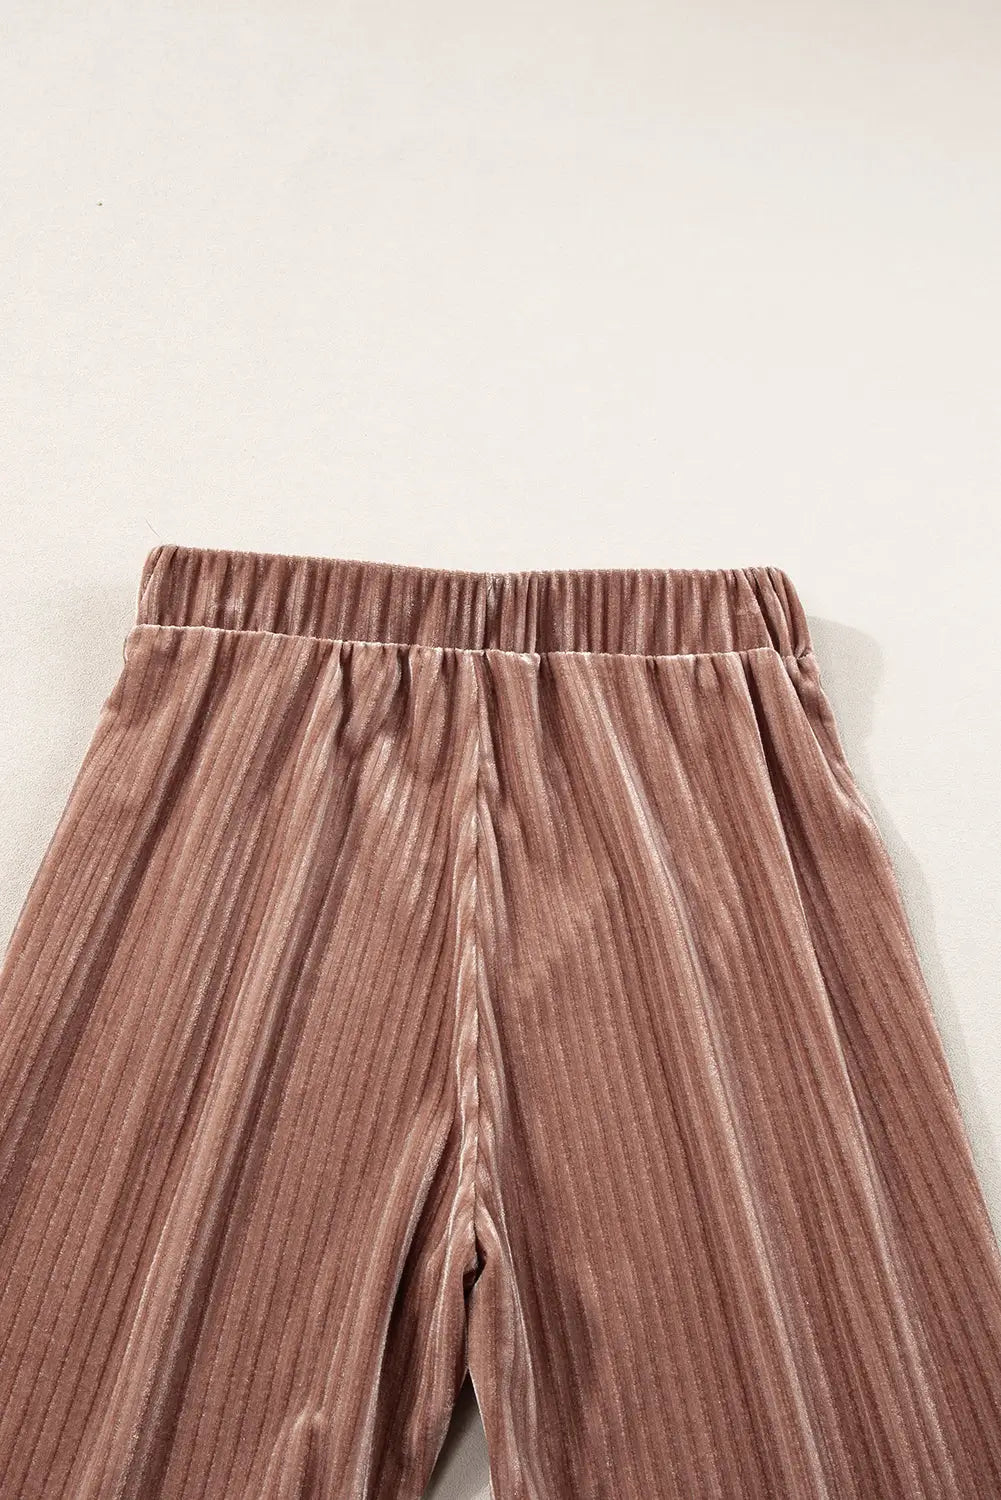 Dusty pink solid color high waist flare corduroy pants - bottoms